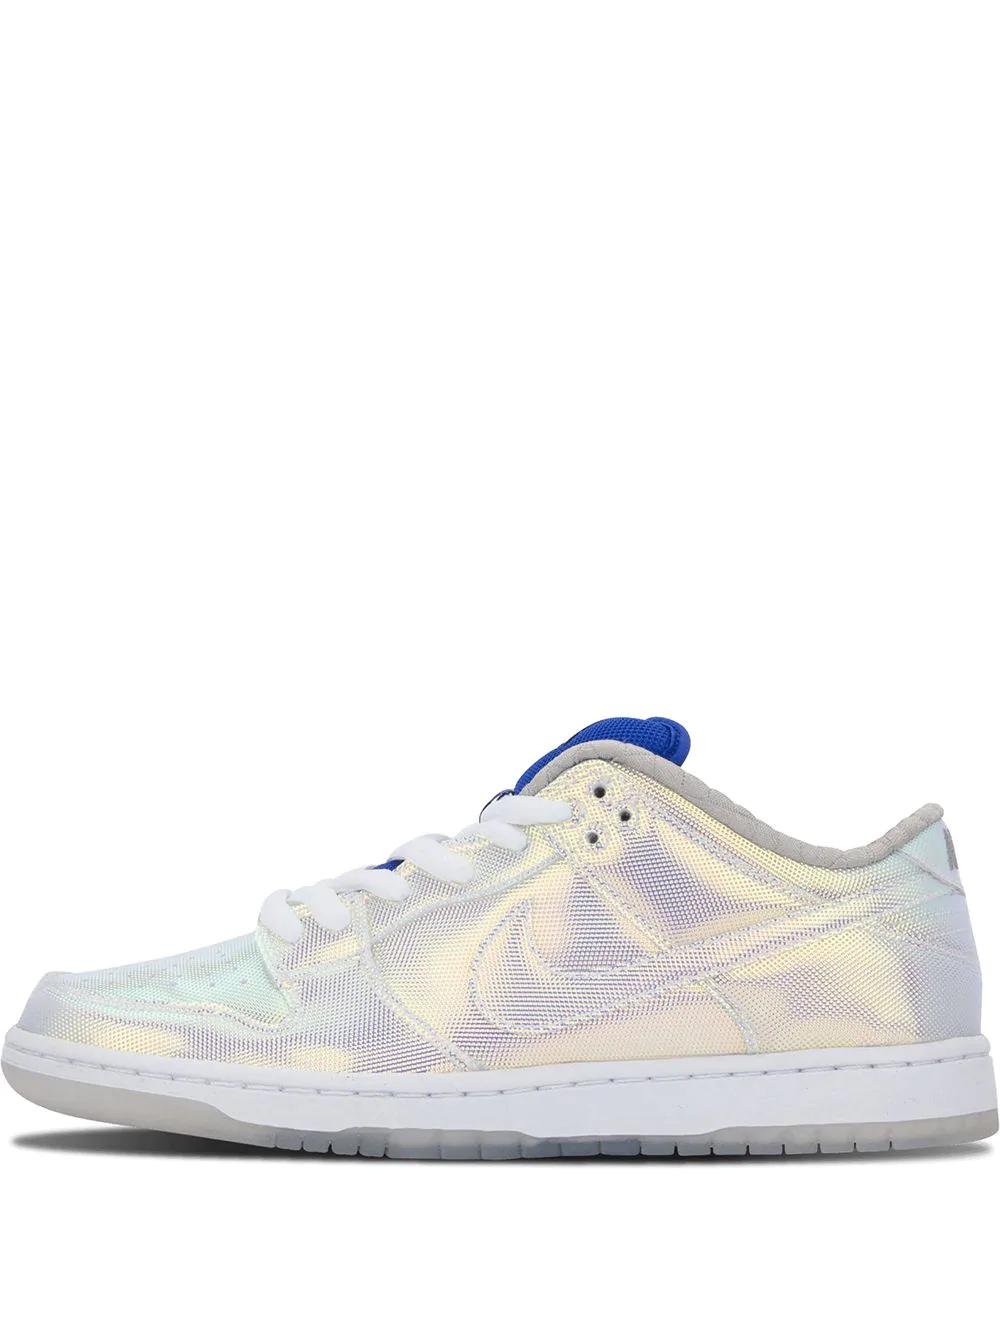 x Concepts SB Dunk Low Pro "Holy Grail" sneakers by NIKE